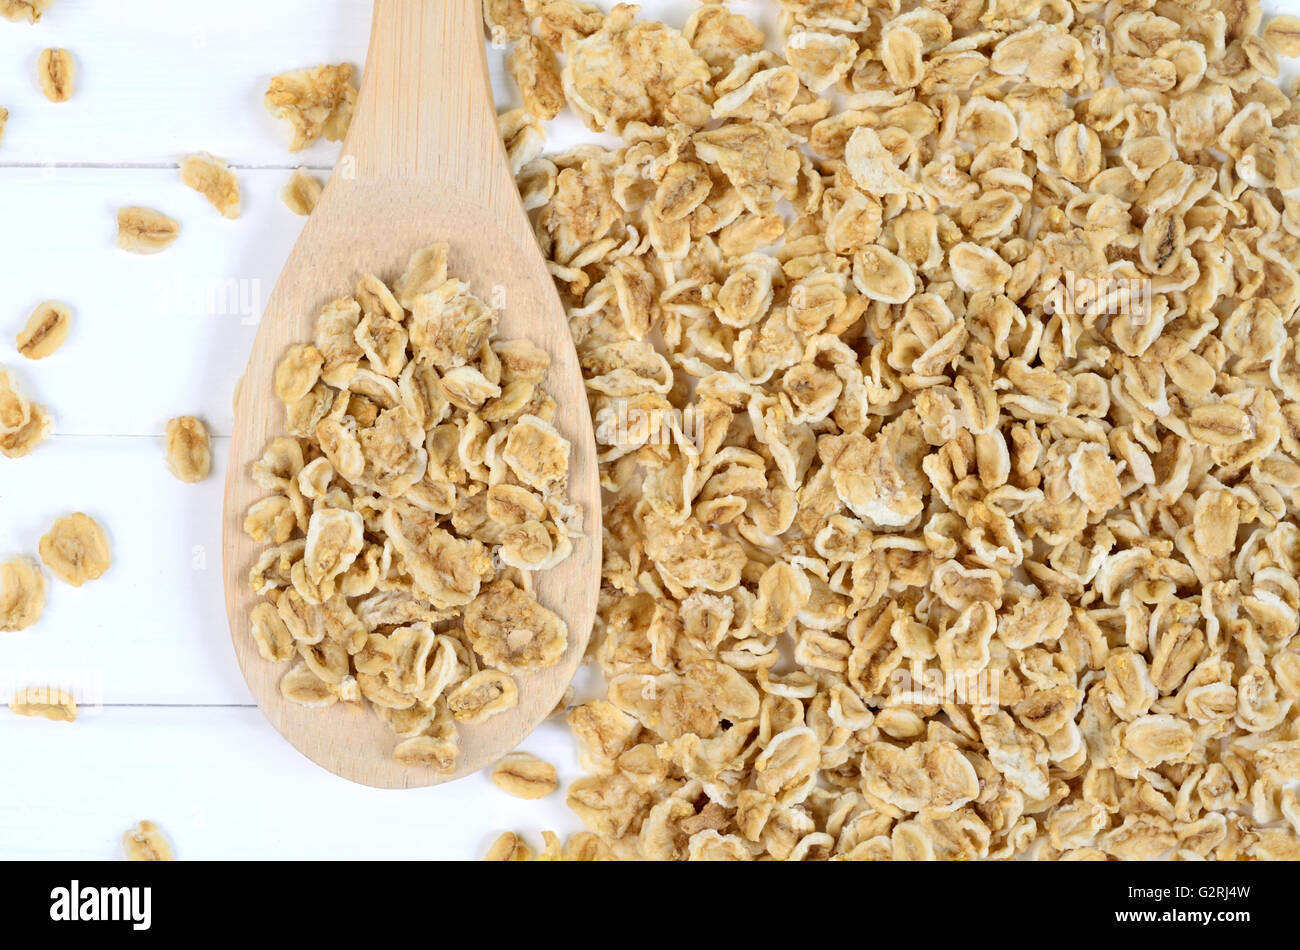 Wooden spoon with crispy oats on table Stock Photo